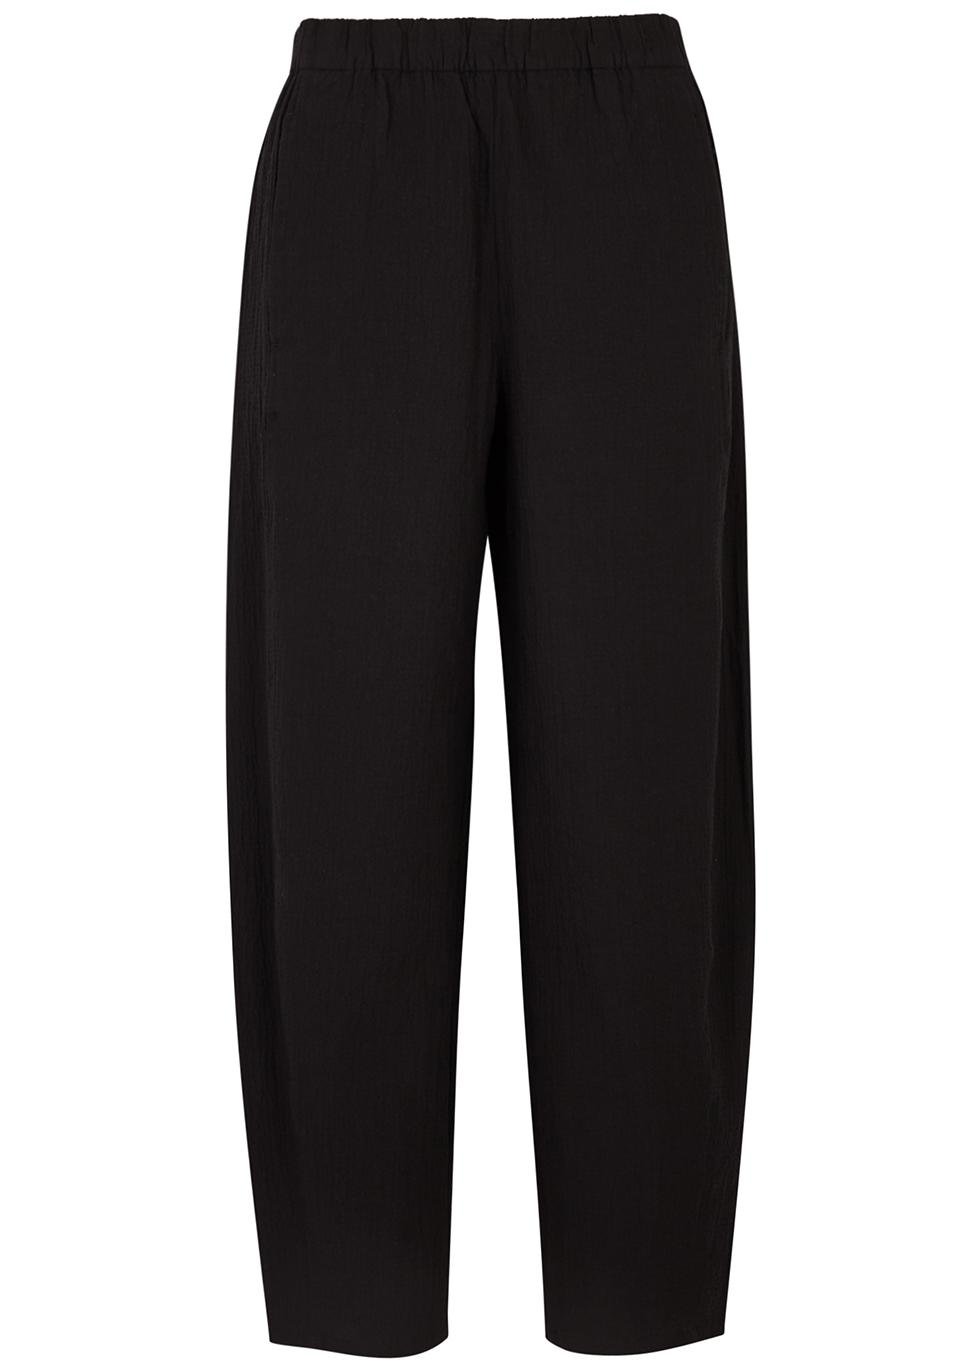 Tapered stretch-cotton trousers by EILEEN FISHER